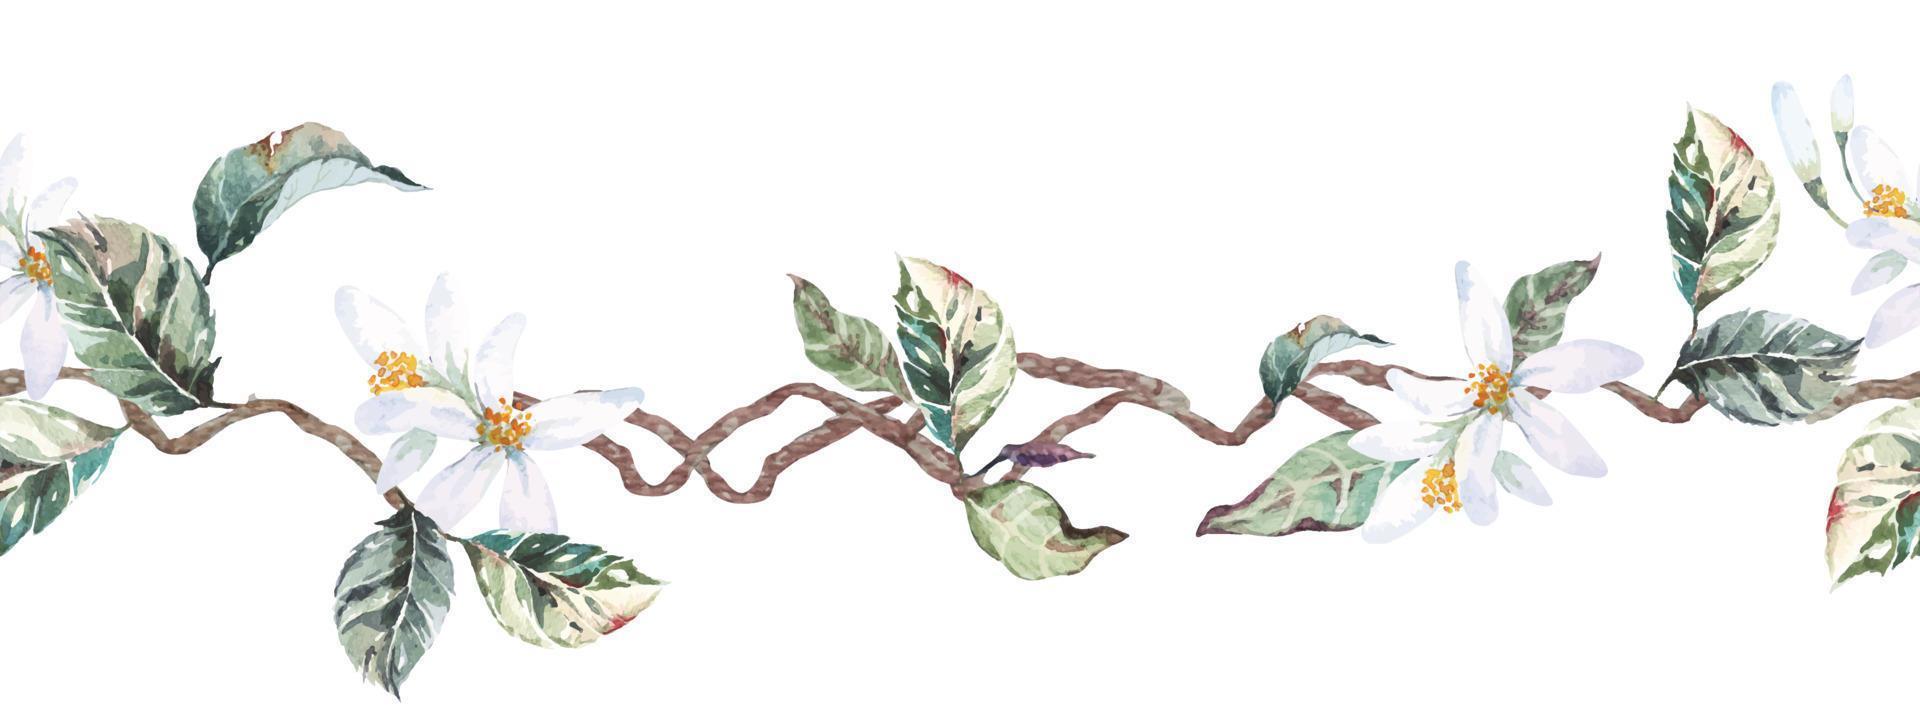 Seamless border leaves and flowers with watercolor. Botanical rim for border design.Style nature vector